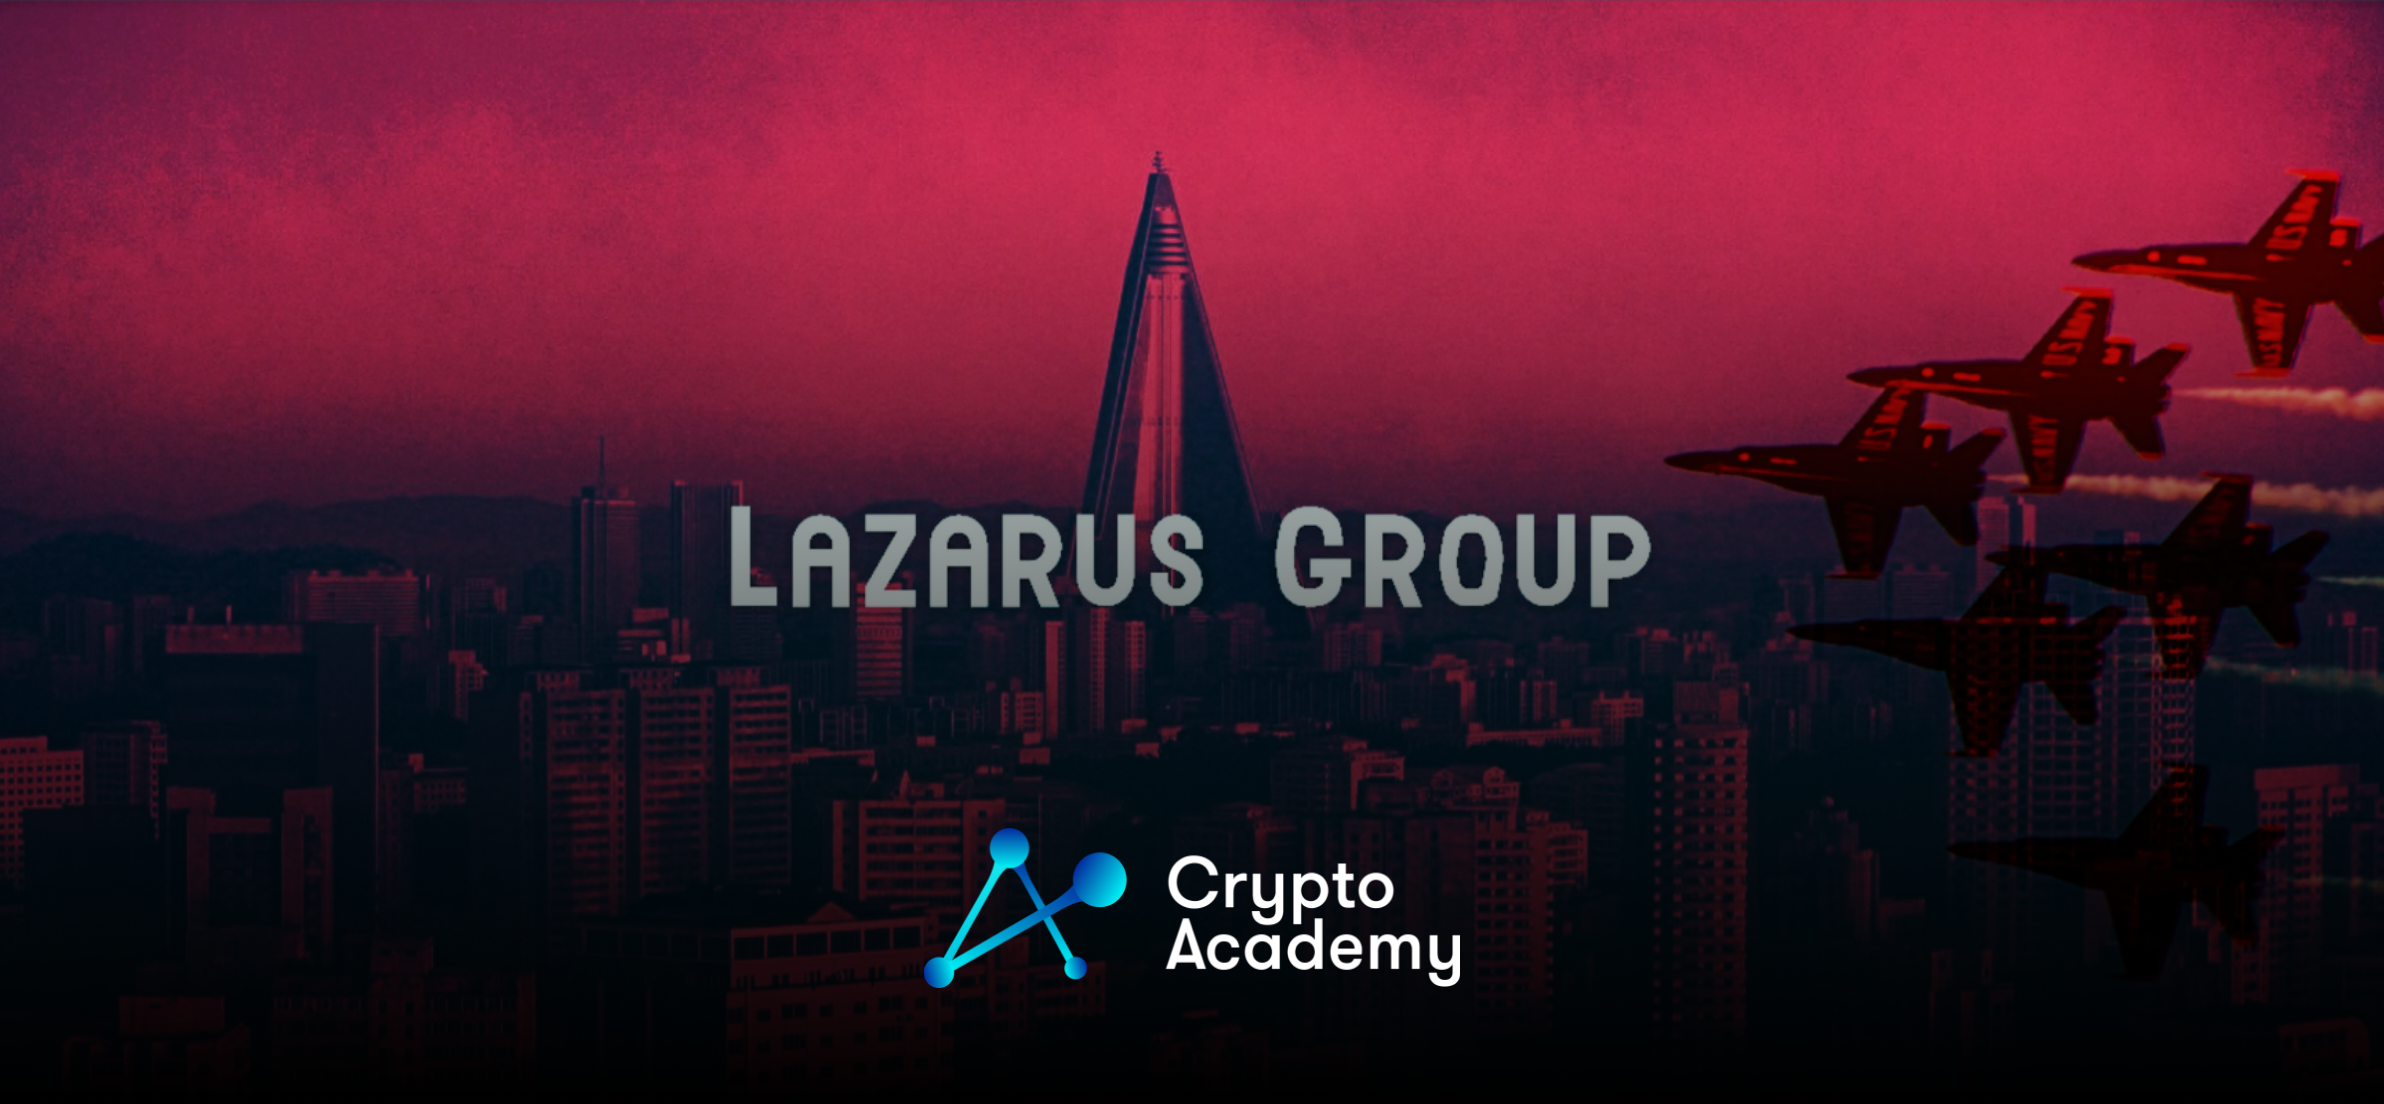 Who Is Lazarus Group? - The North Korean Group Terrorizing The Crypto Industry